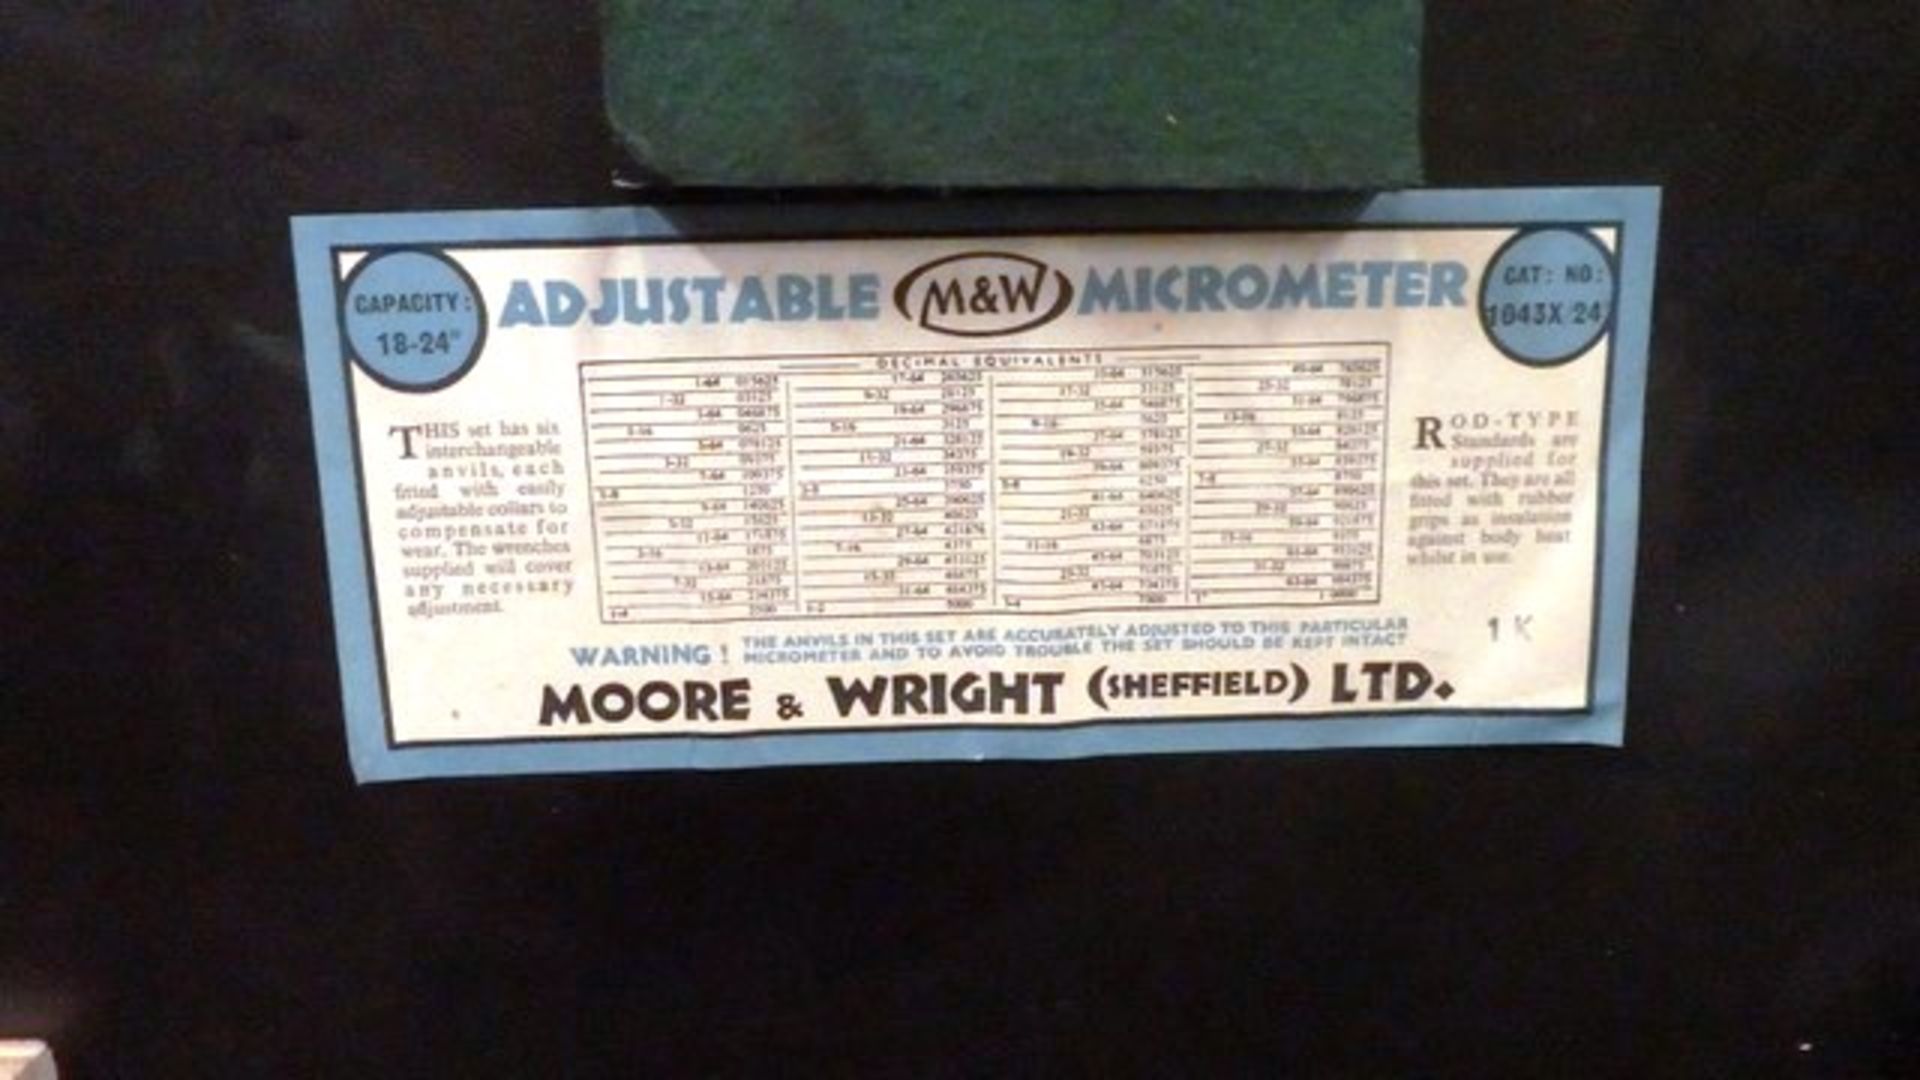 IMPERIAL MICROMETER 18" - 24" (MOORE & WRIGHT, SHEFFIELD)*LIQUIDATED STOCK* - Image 6 of 9